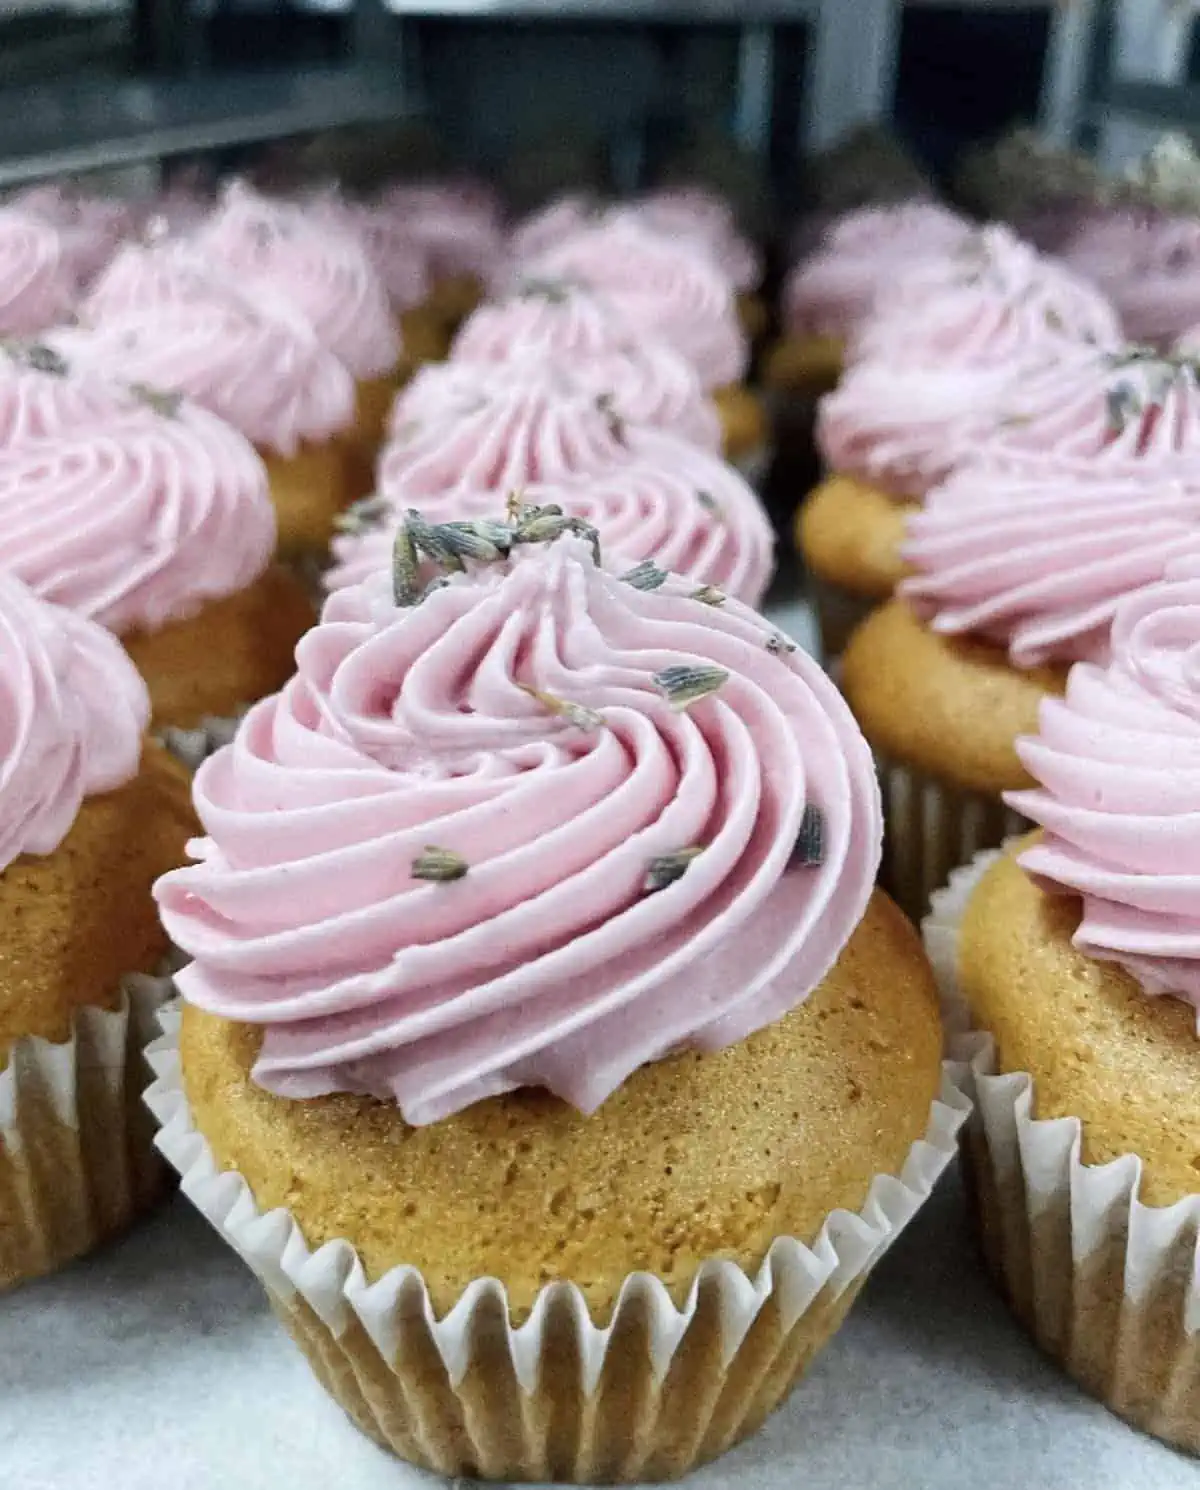 Vanilla vegan cupcakes with pink frosting from Zucchini Kill Bakery in Austin, Texas